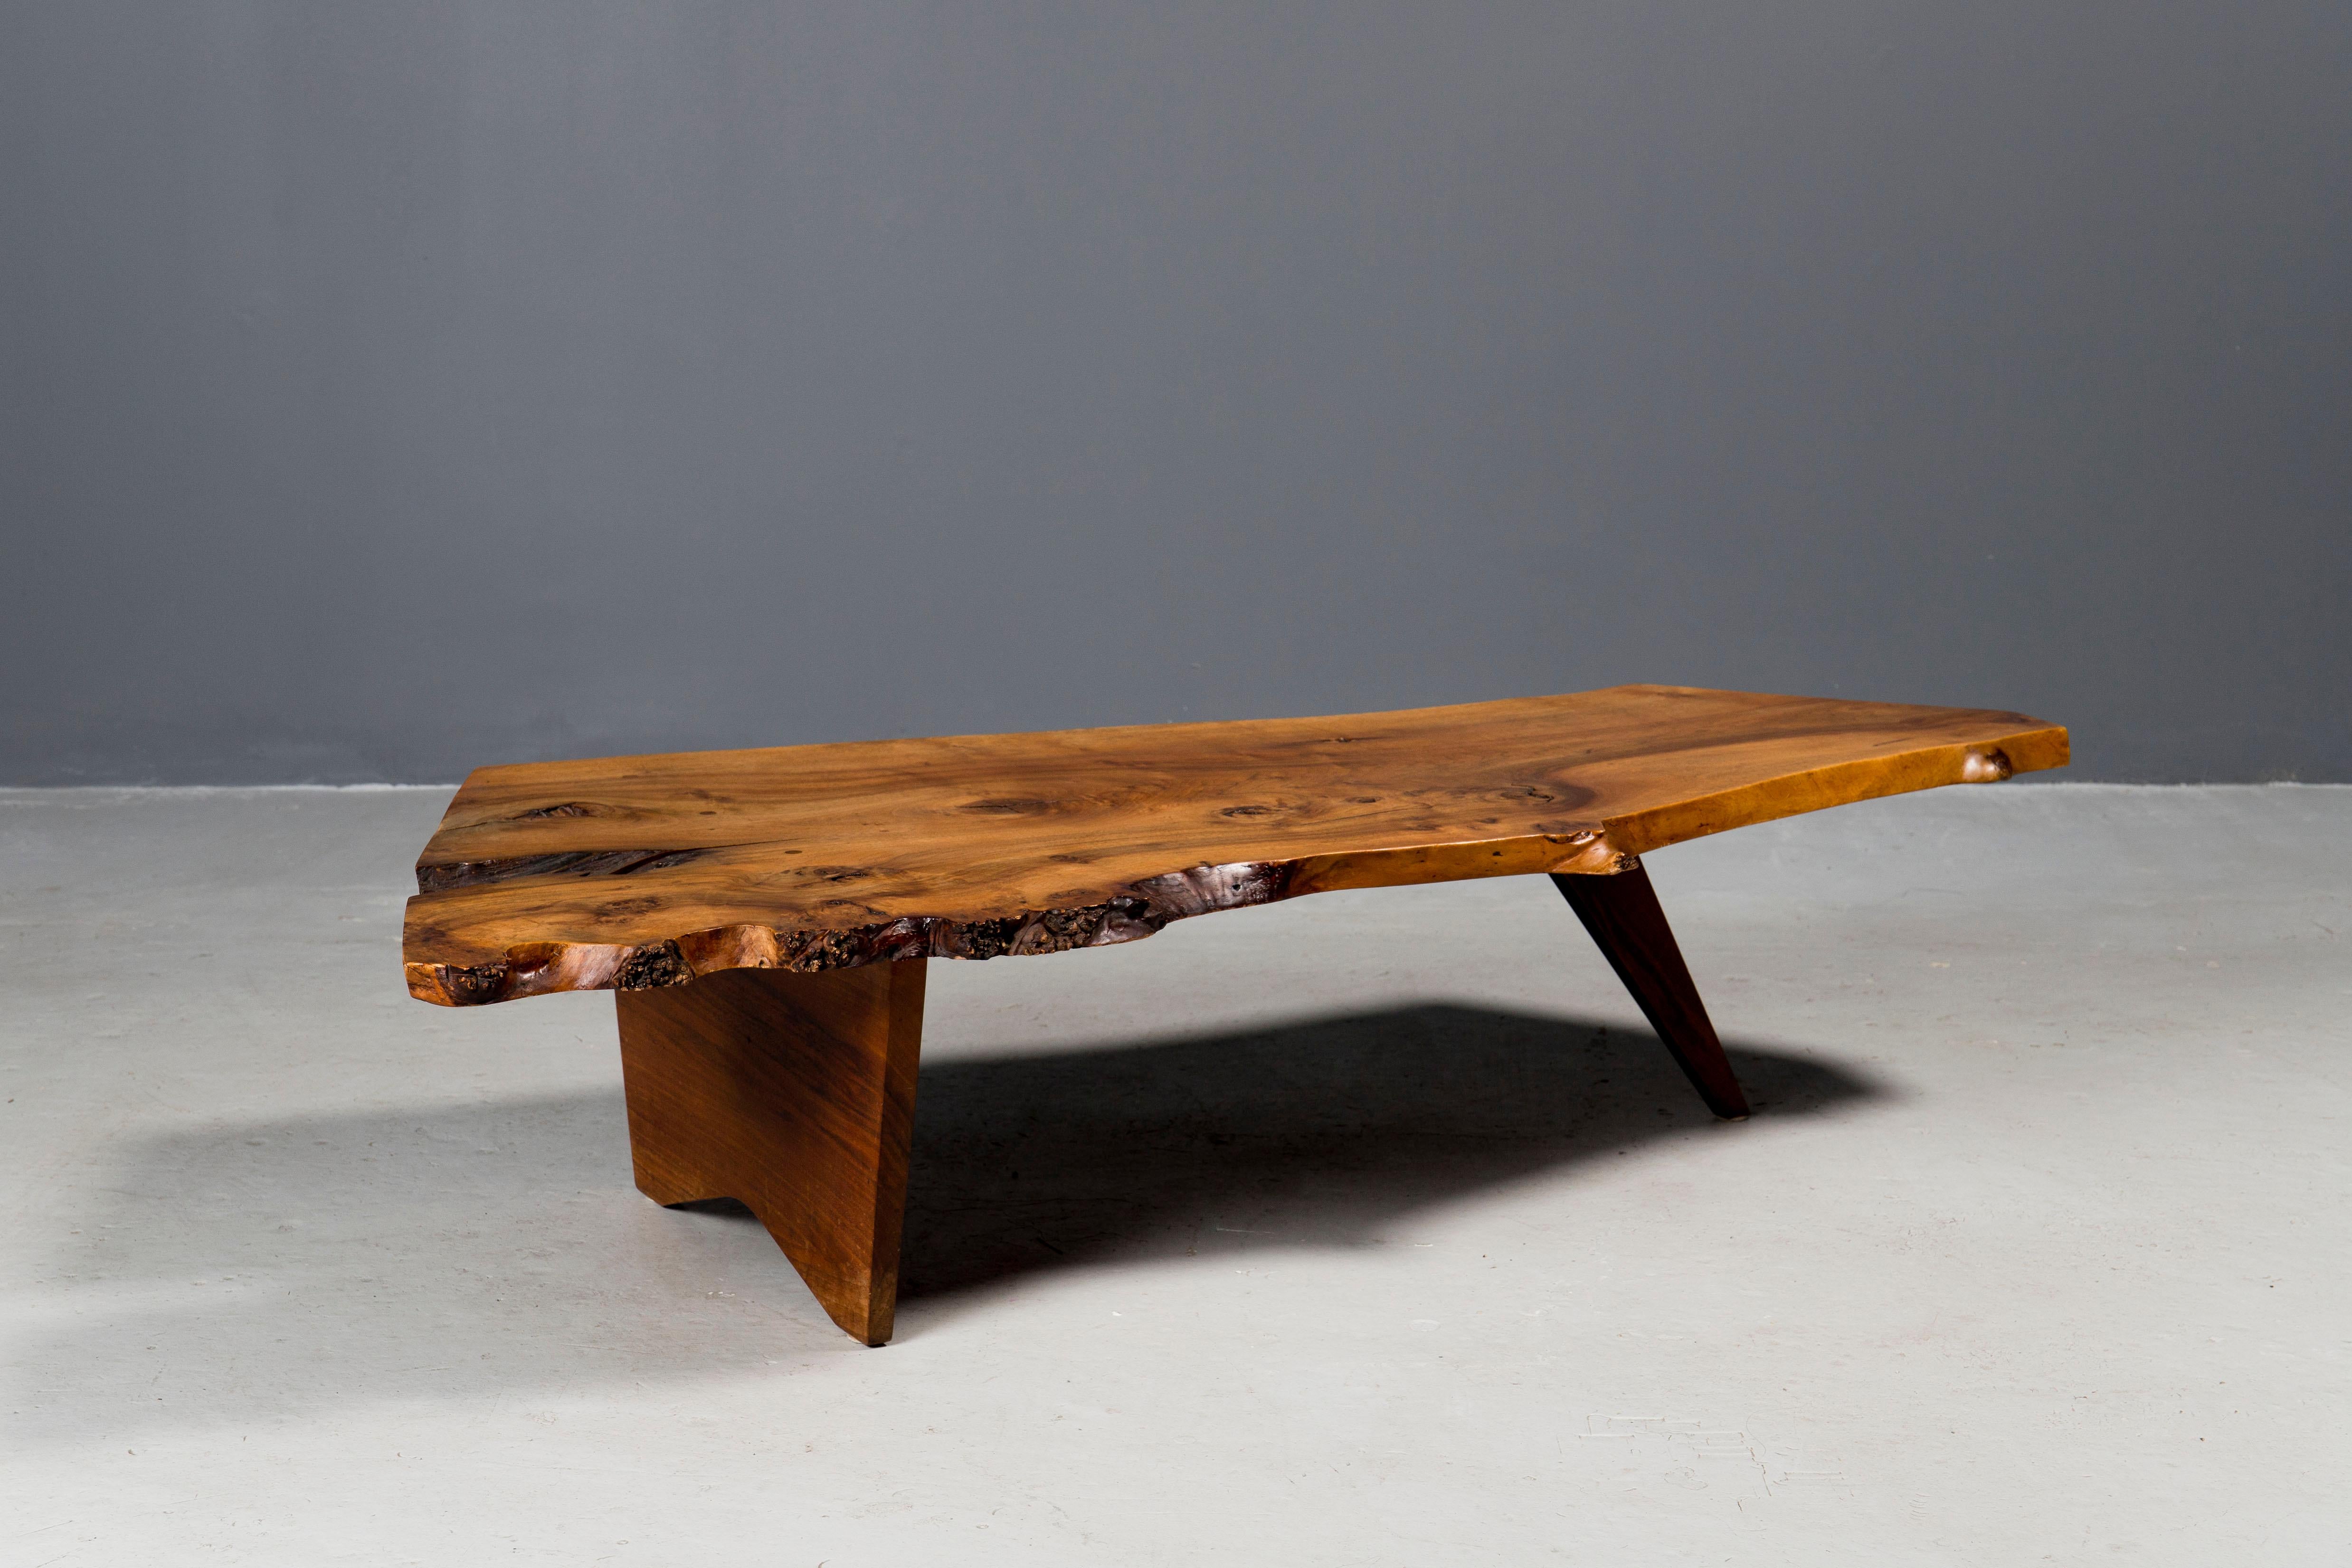 Early English and black American walnut coffee table by studio artist George Nakashima, ca 1950s, New Hope, PA.
Expressive burl live edge and highly figural grain throughout. 
Original condition and warm patina.
Documented and copy of the order